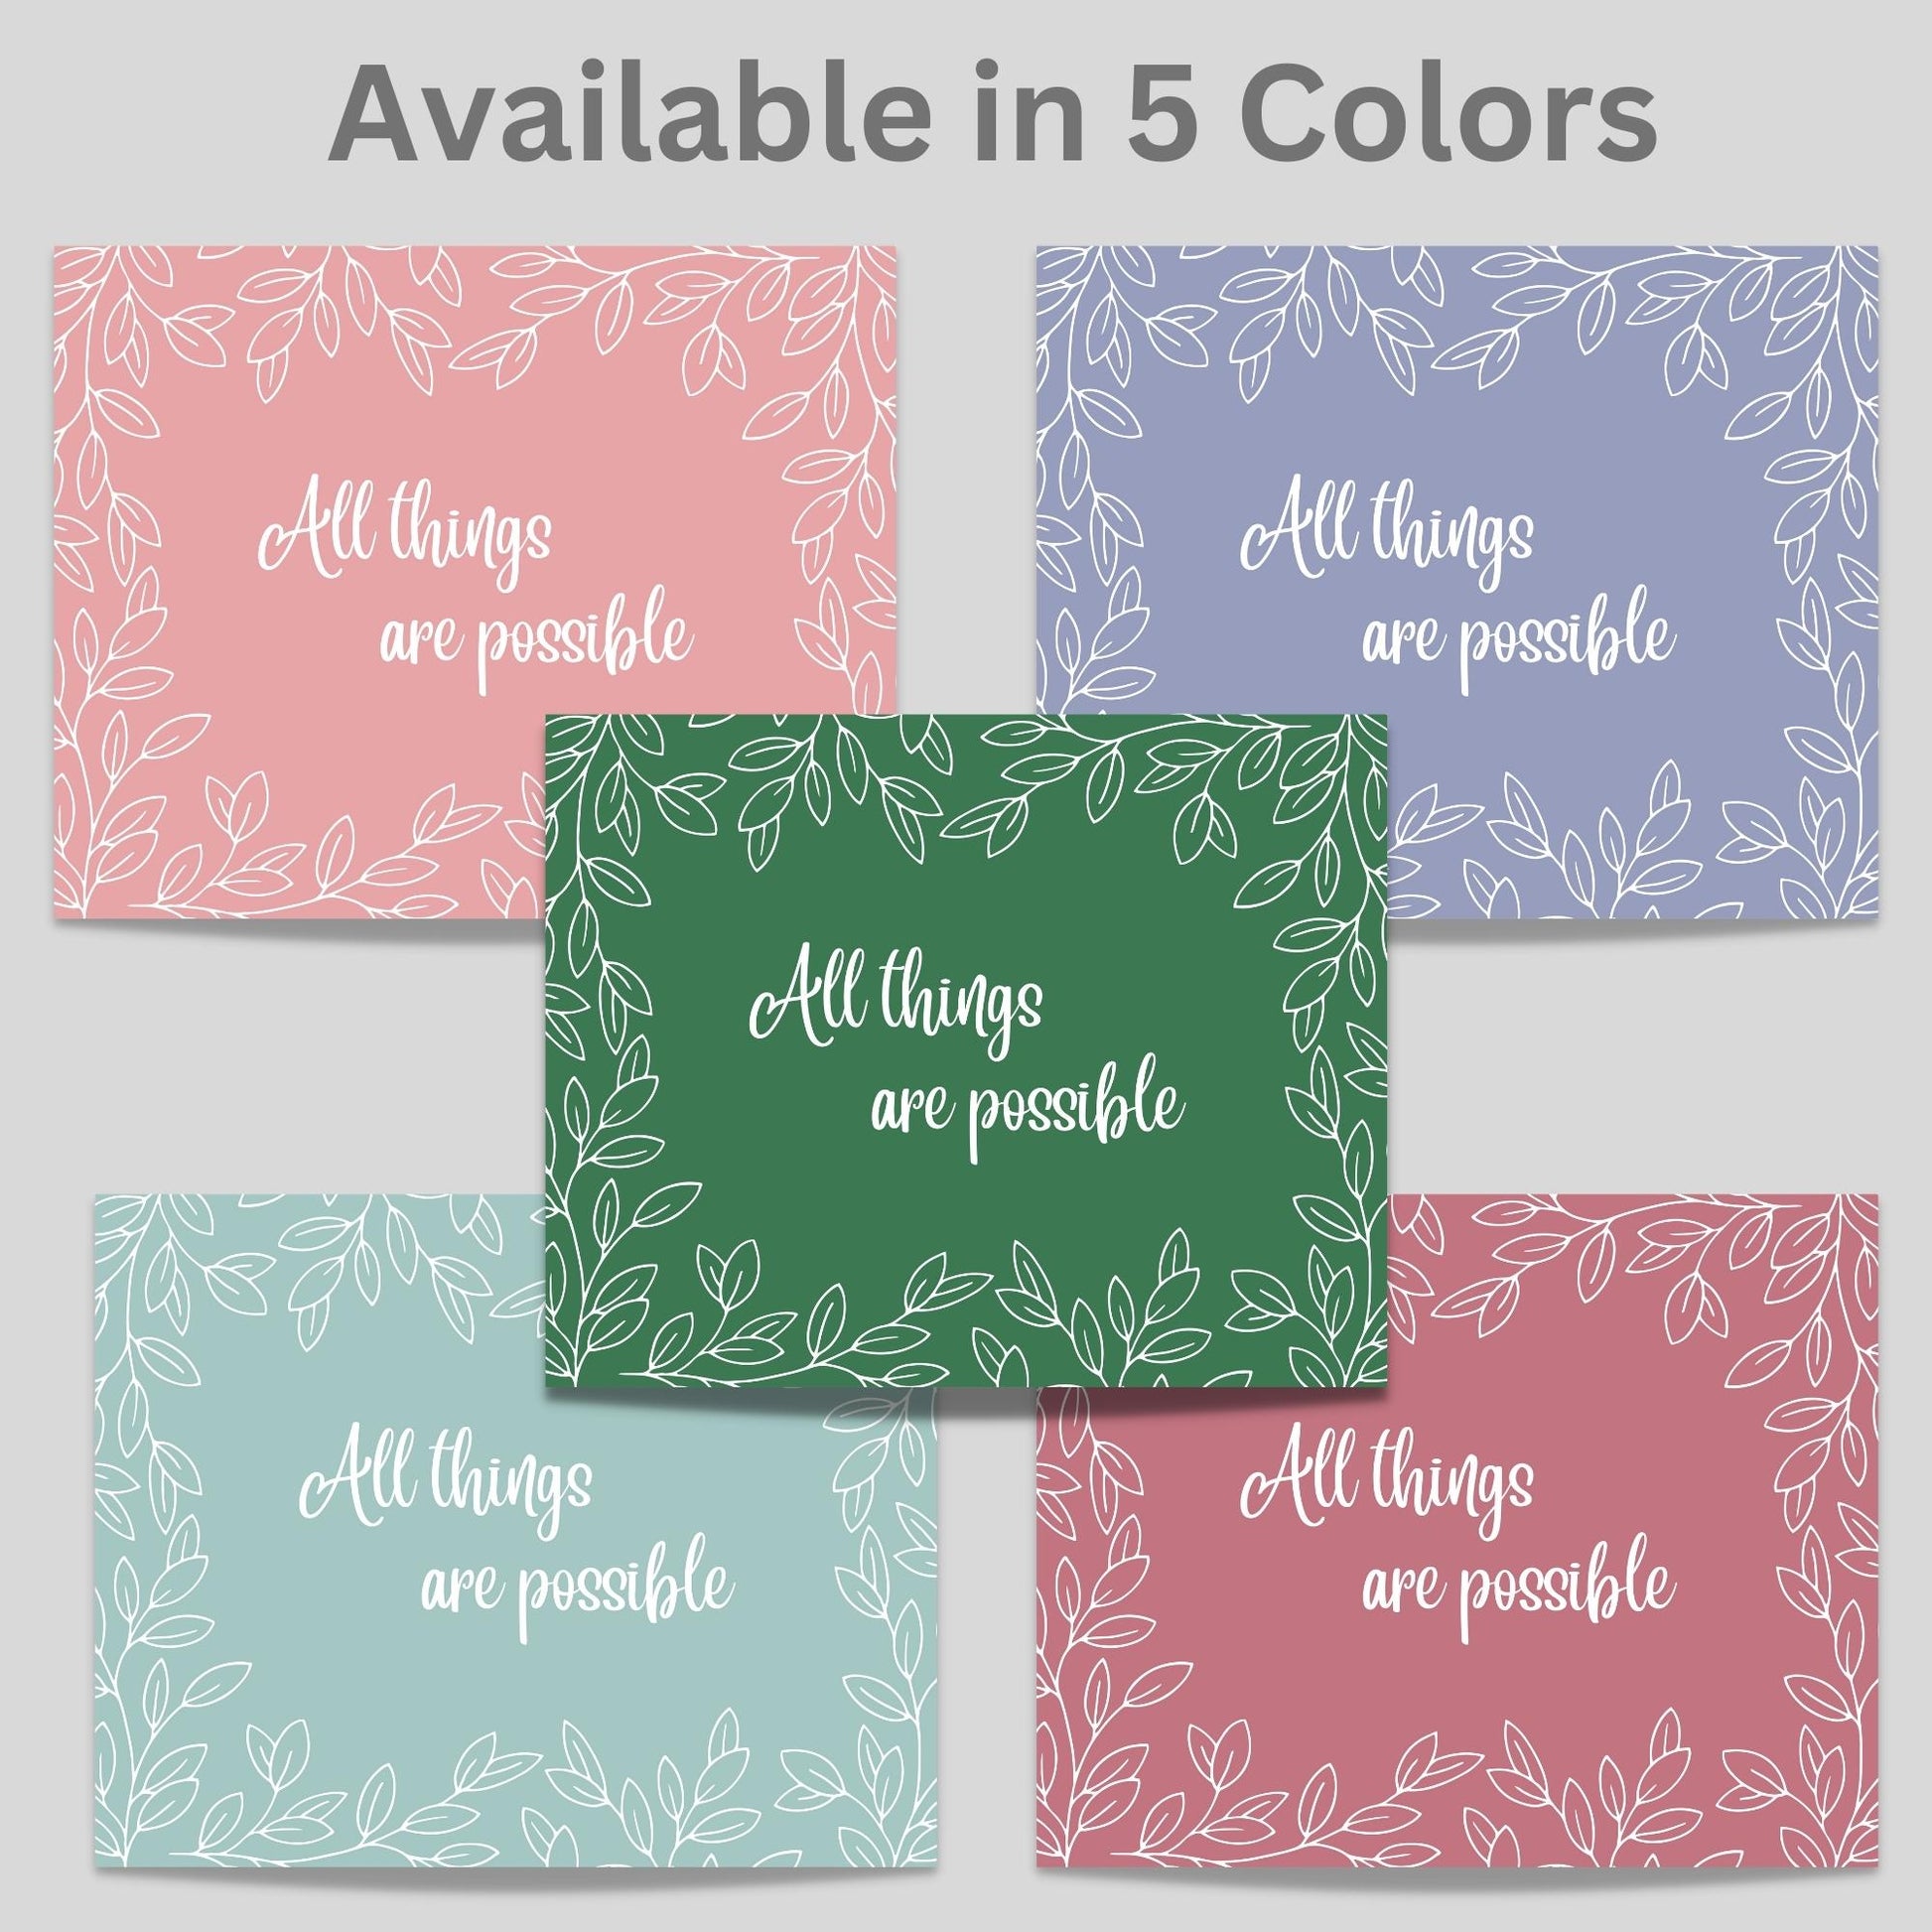 Inspirational Word Art - All things are possible - Leaf Design Wall Decor (10x8 print) choose from 5 colors | oak7west.com